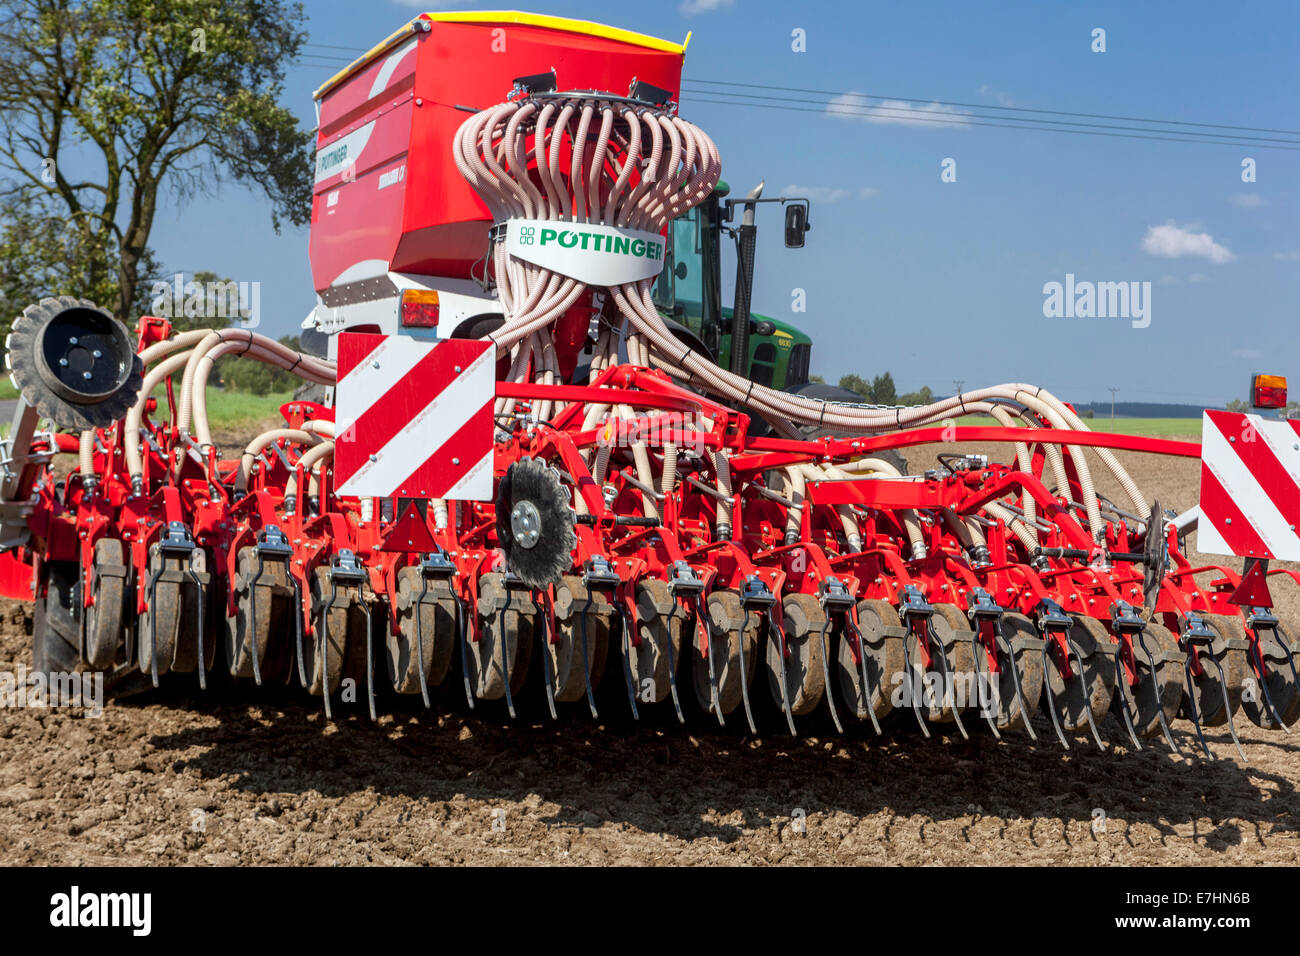 Seed-drill, sowing machine seedling Agriculture machinery seeder  hopper Czech Republic Europe farming Stock Photo